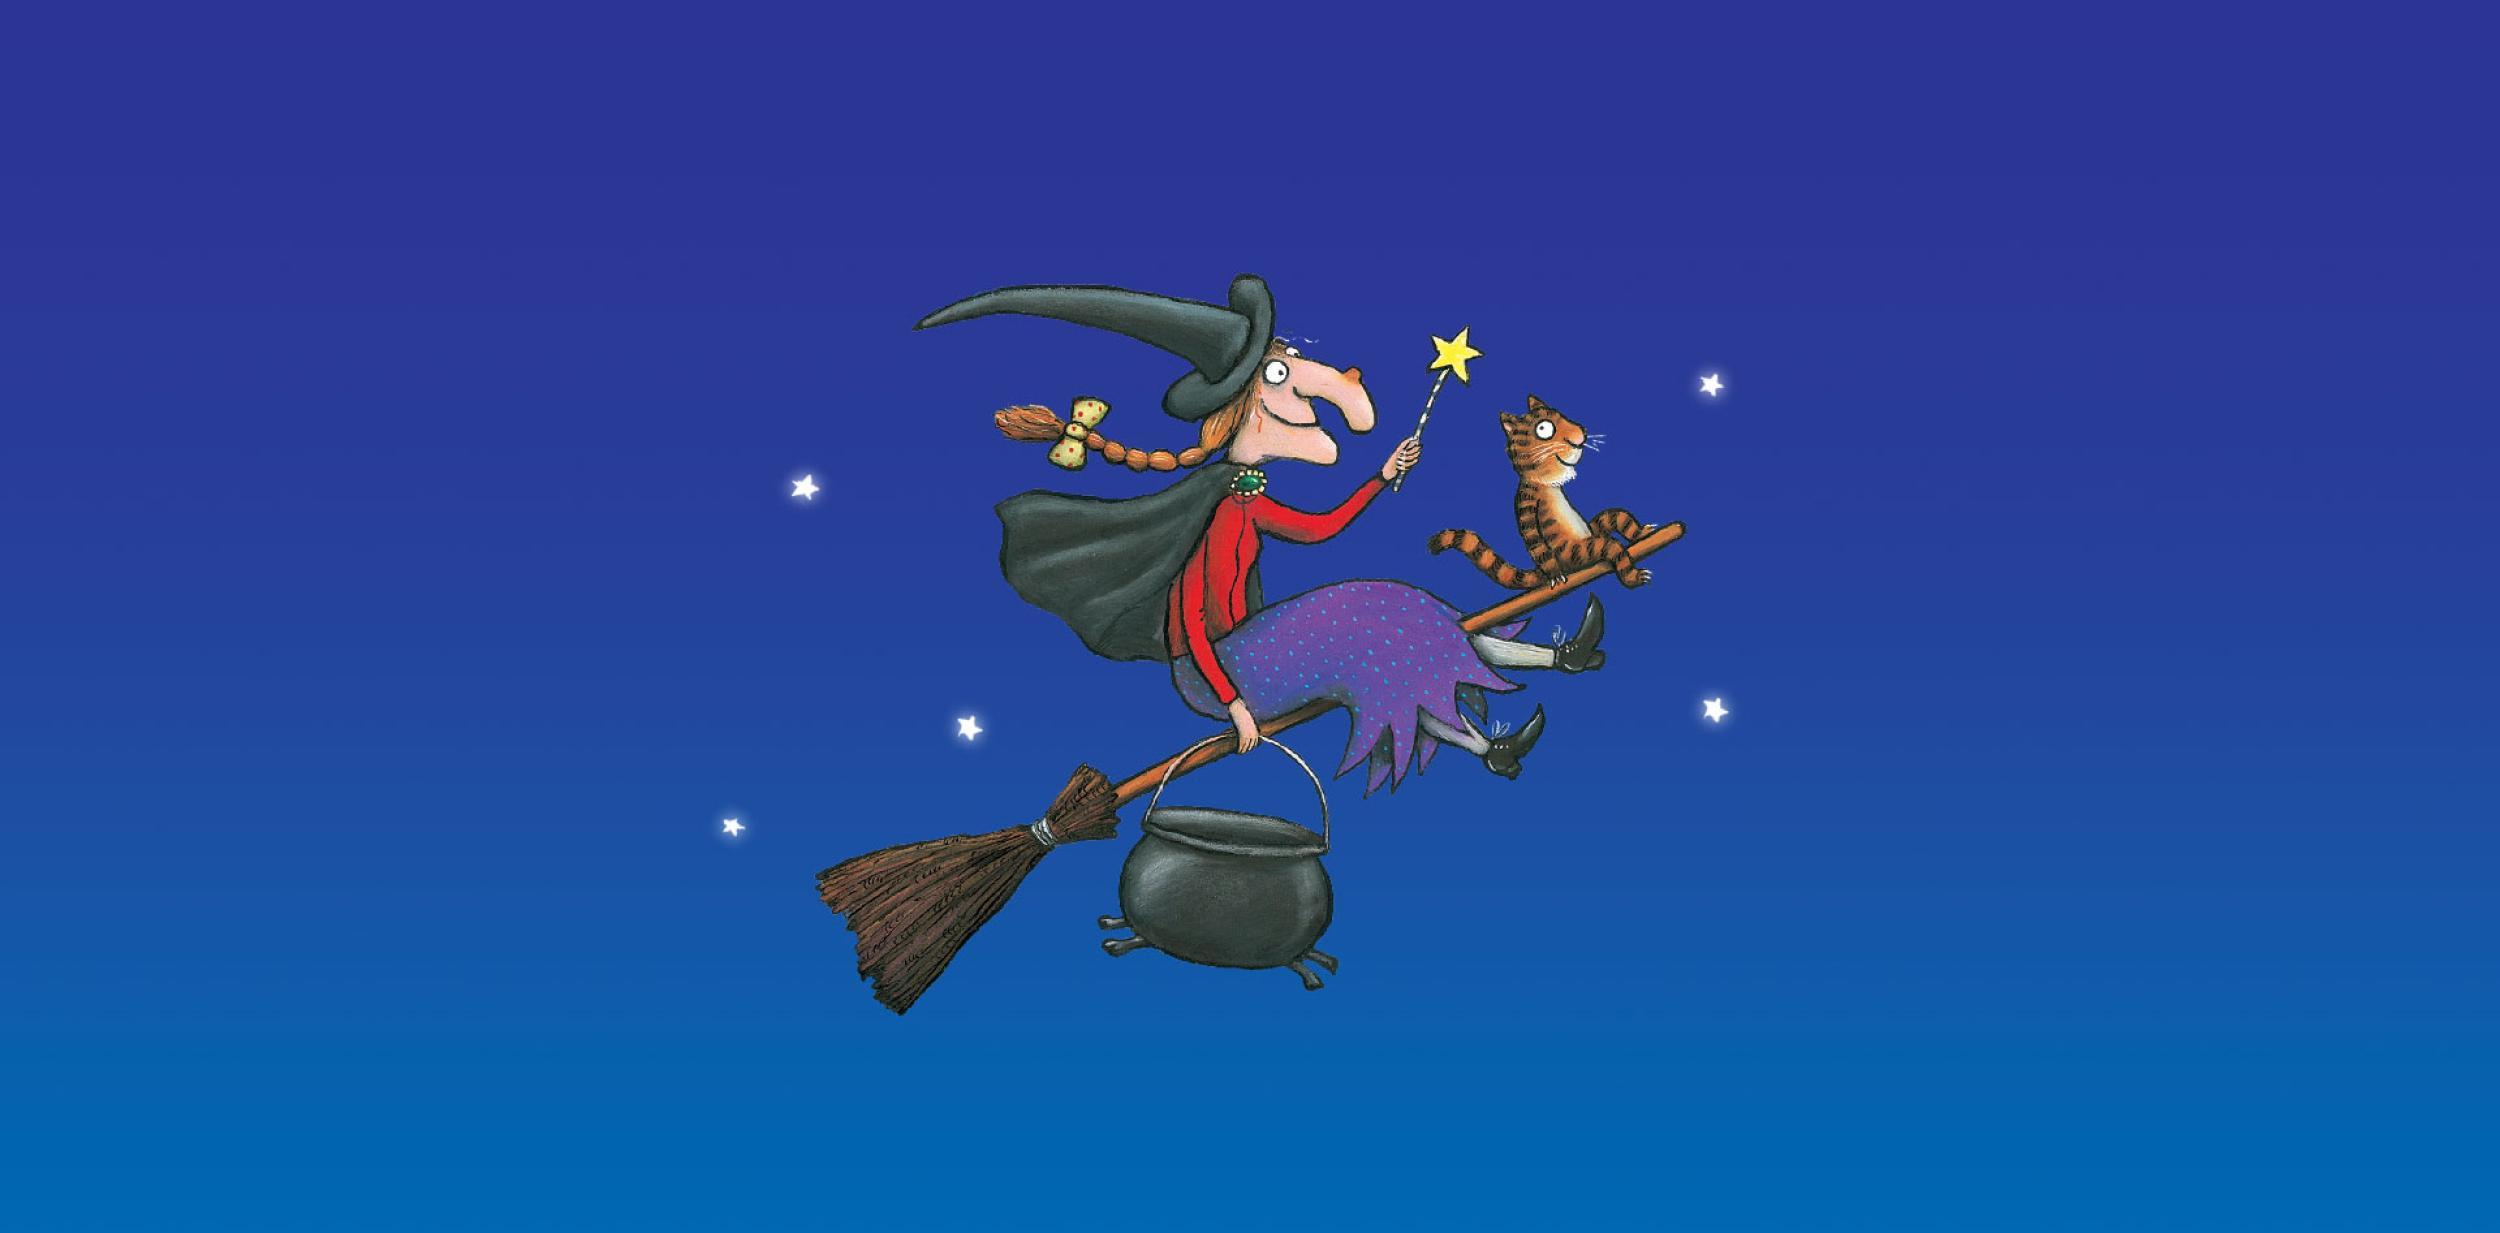 Illustration of a witch and cat flying on a broom-stick